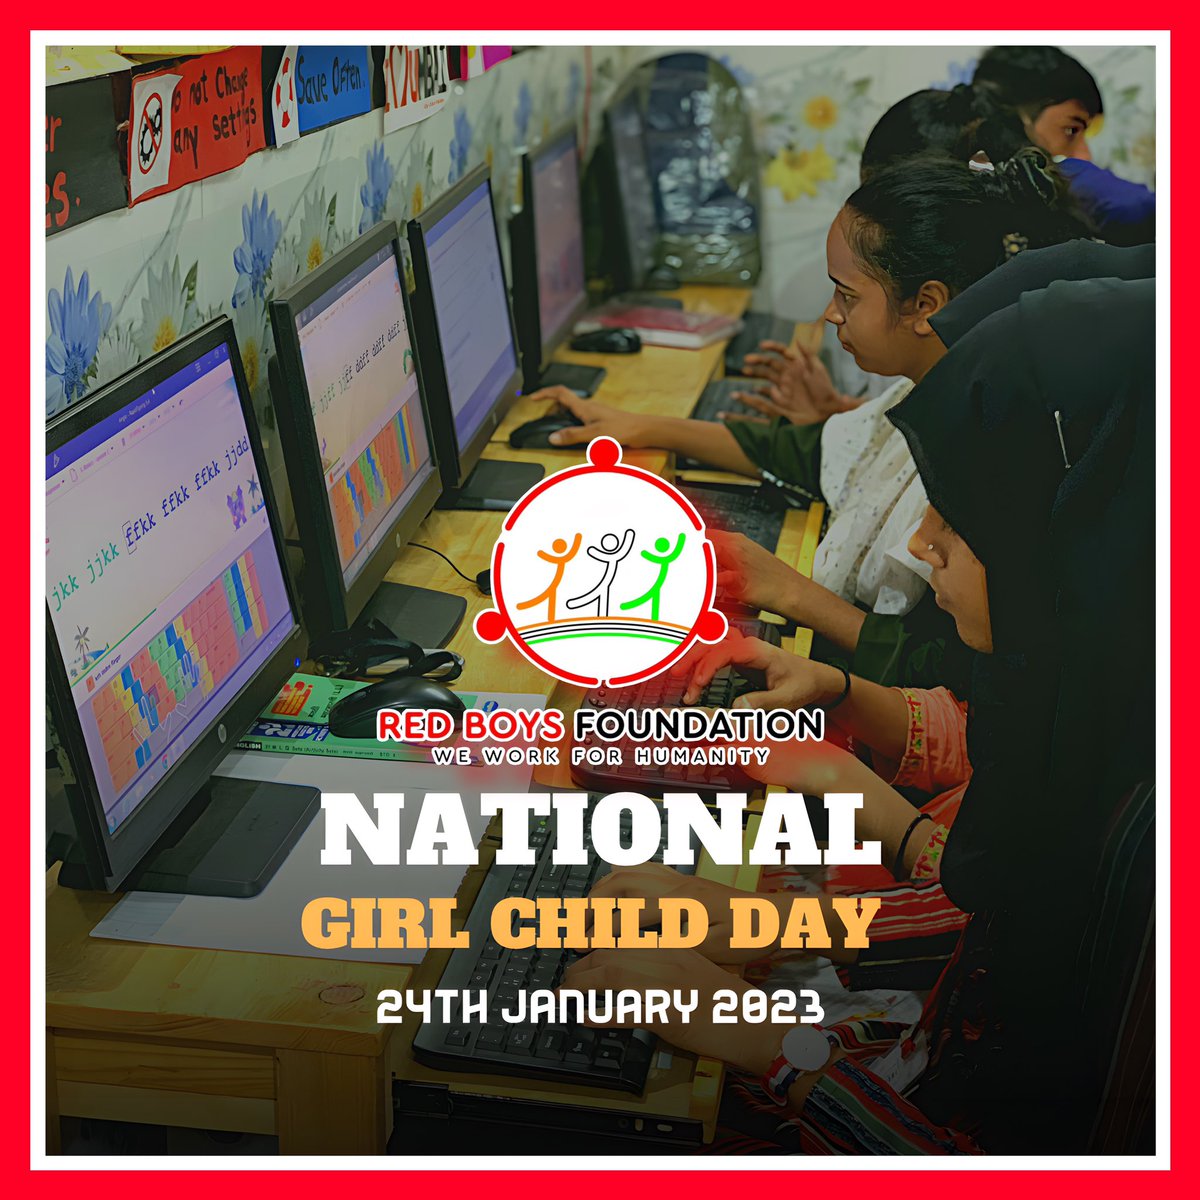 Educate a girl & see the world
transform!
A saying we have often heard, but what does it mean for the girl child?
This National #GirlChildDay, let's empower every girl
to get their #RightToEducation & explore their #PowertoChoose!
#girlpower #redboysfoundation @Iamrahulkanal bro